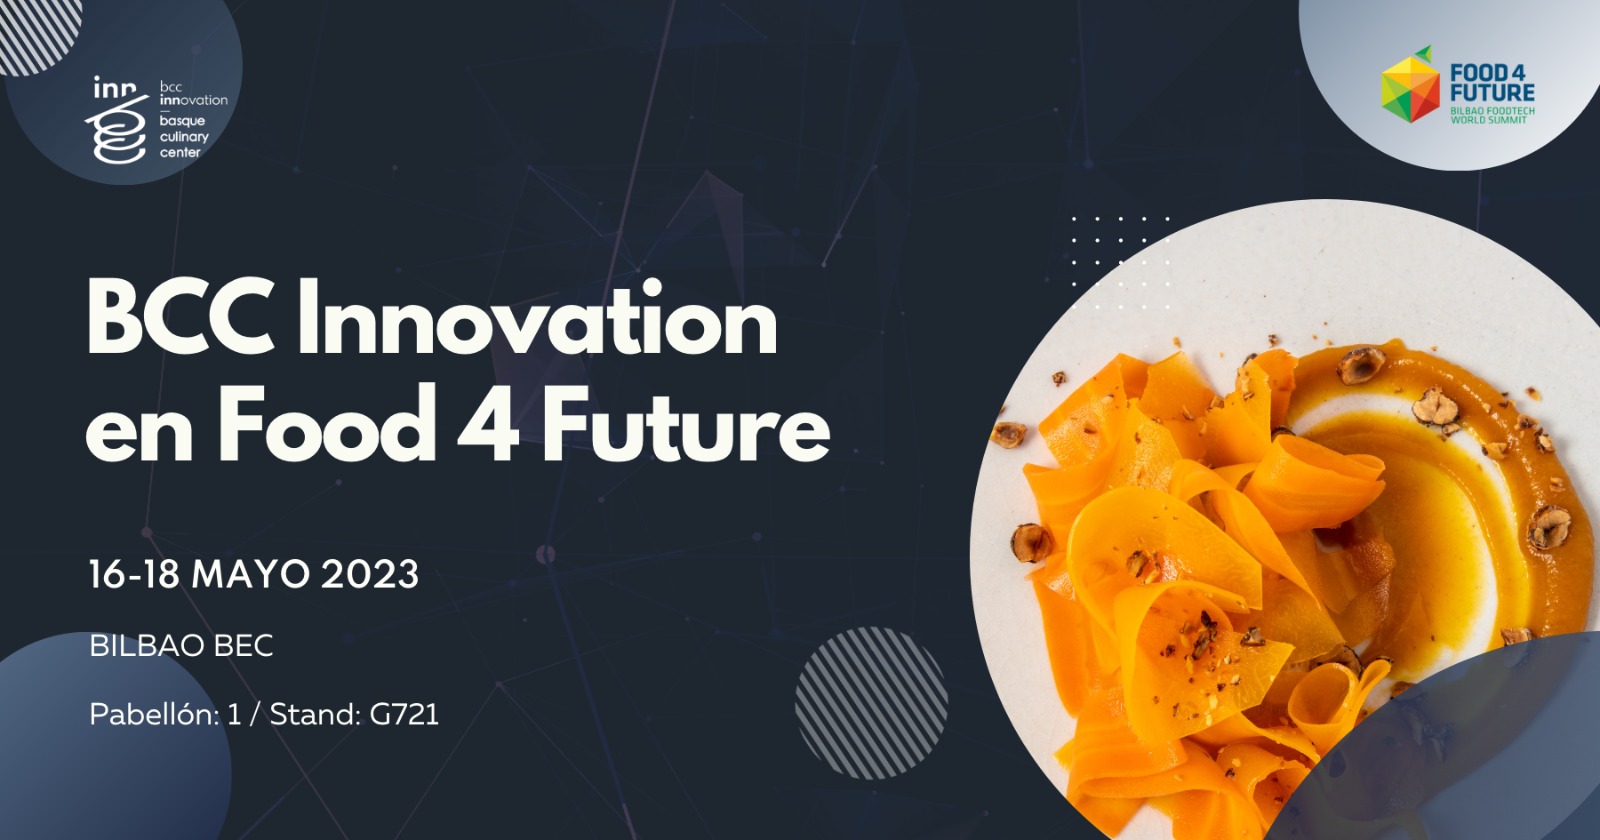 We will participate in a new edition of Food 4 Future event in Bilbao